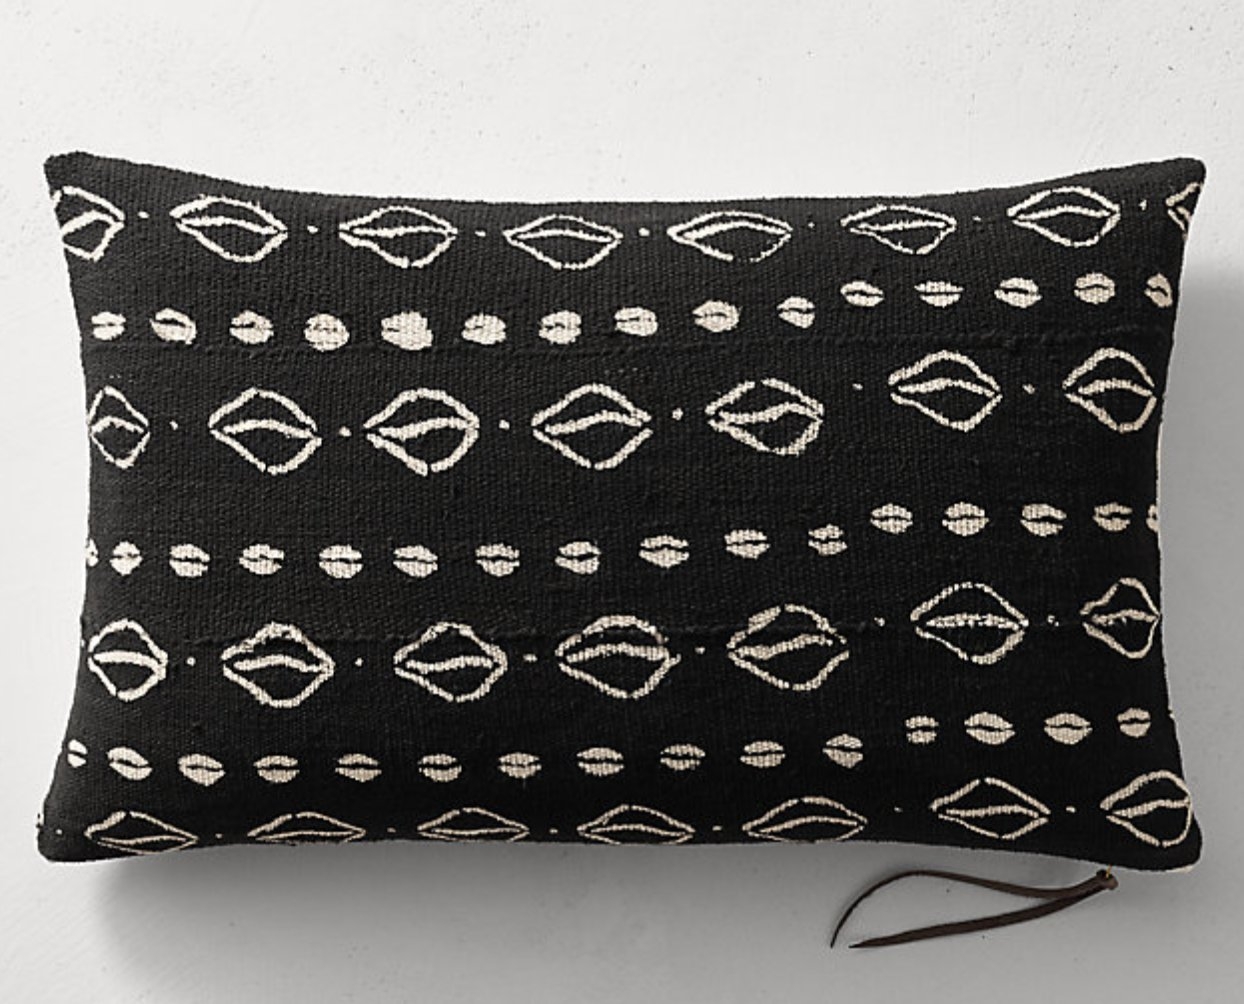 HANDWOVEN AFRICAN MUD CLOTH COWRIE SHELL PILLOW COVER - BLACK - 13" x 21" - No insert - Image 0